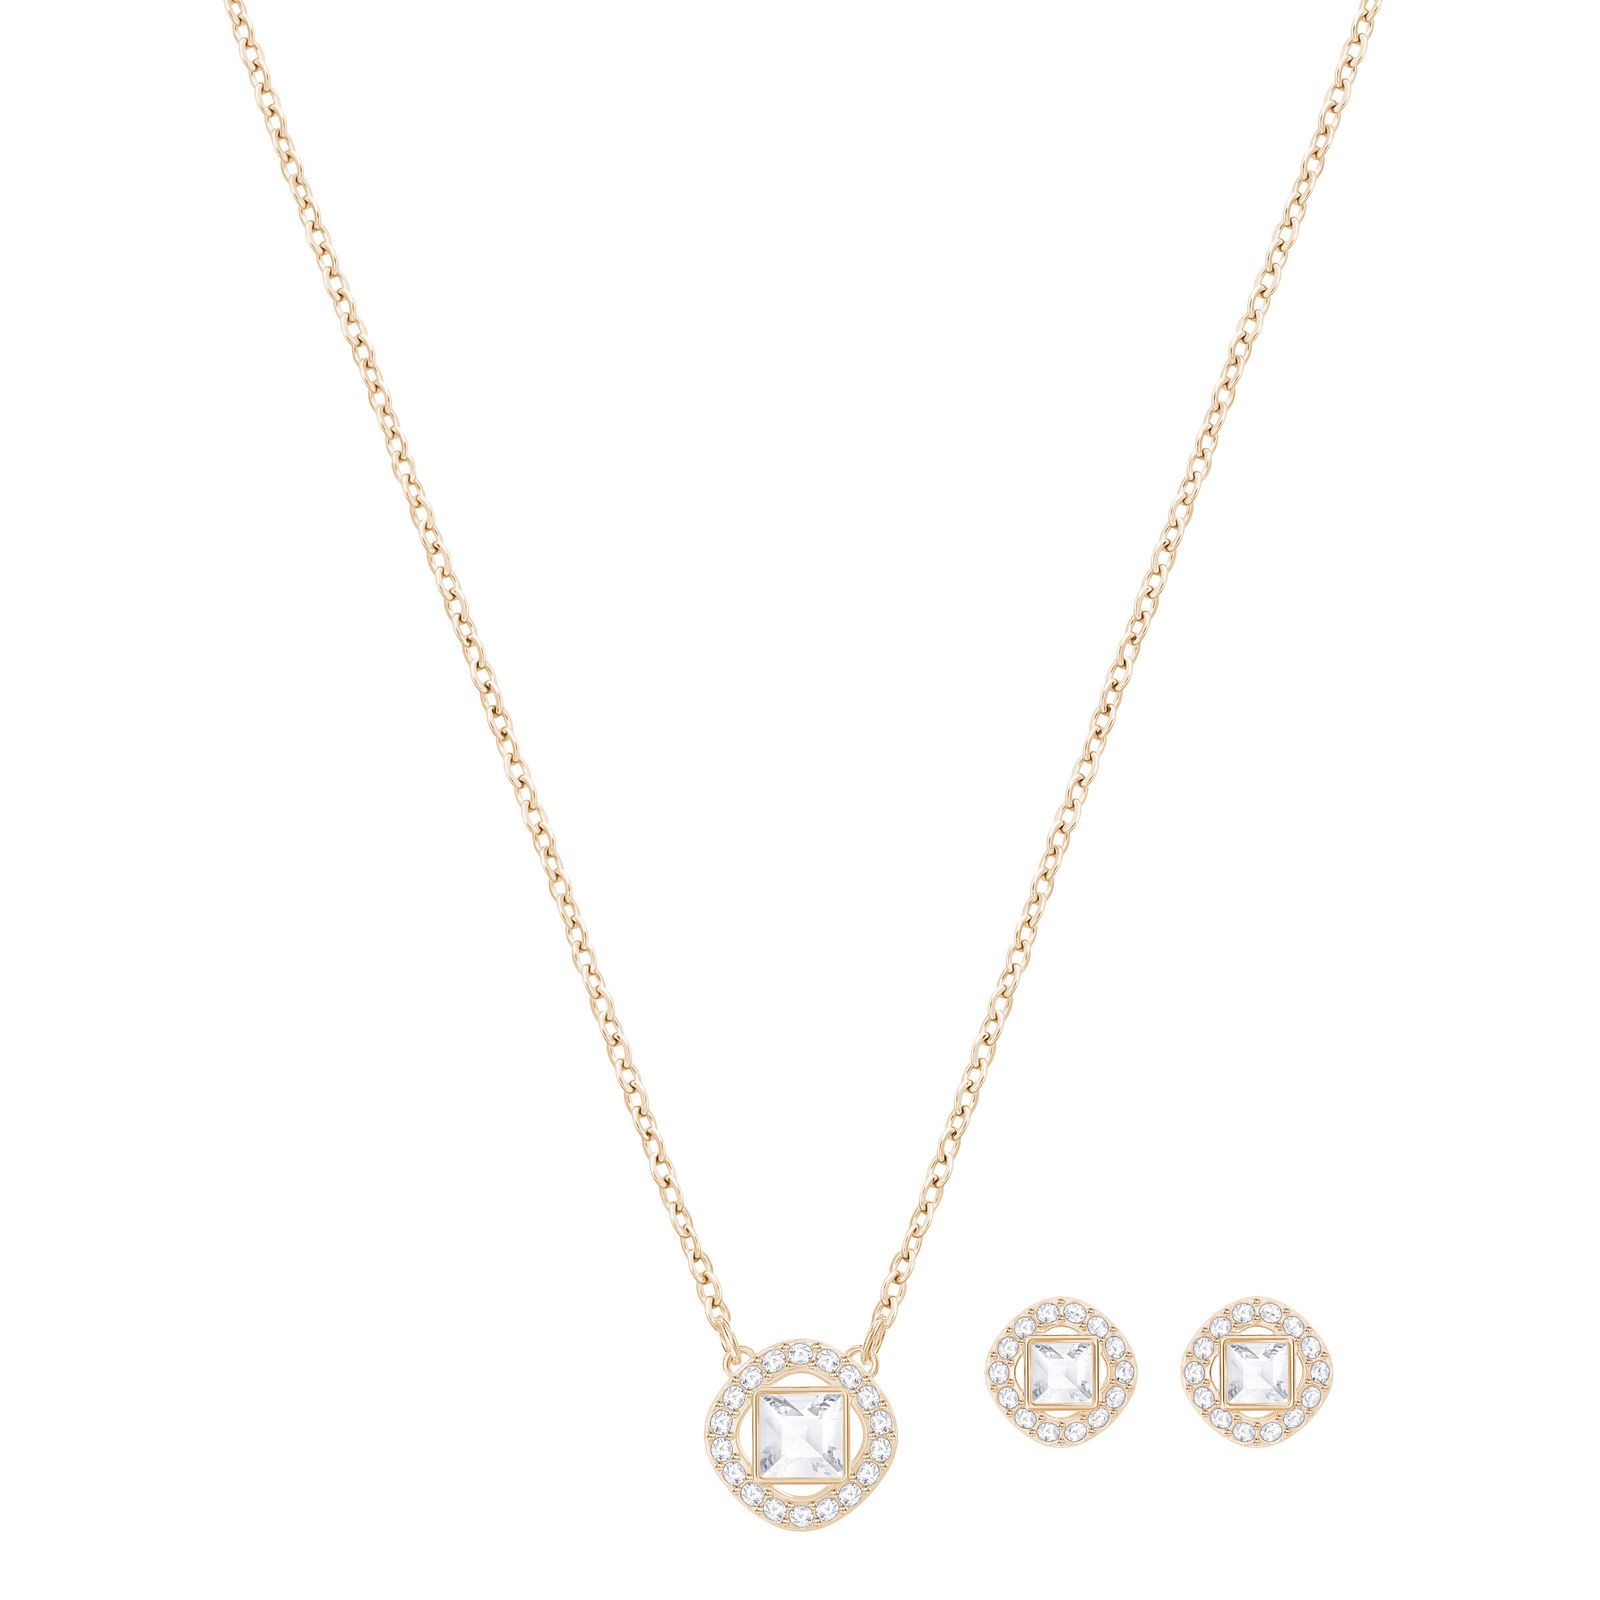 Swarovski Angelic Square Rose Gold Plated Set Regarding Current Square Sparkle Halo Necklaces (View 13 of 25)